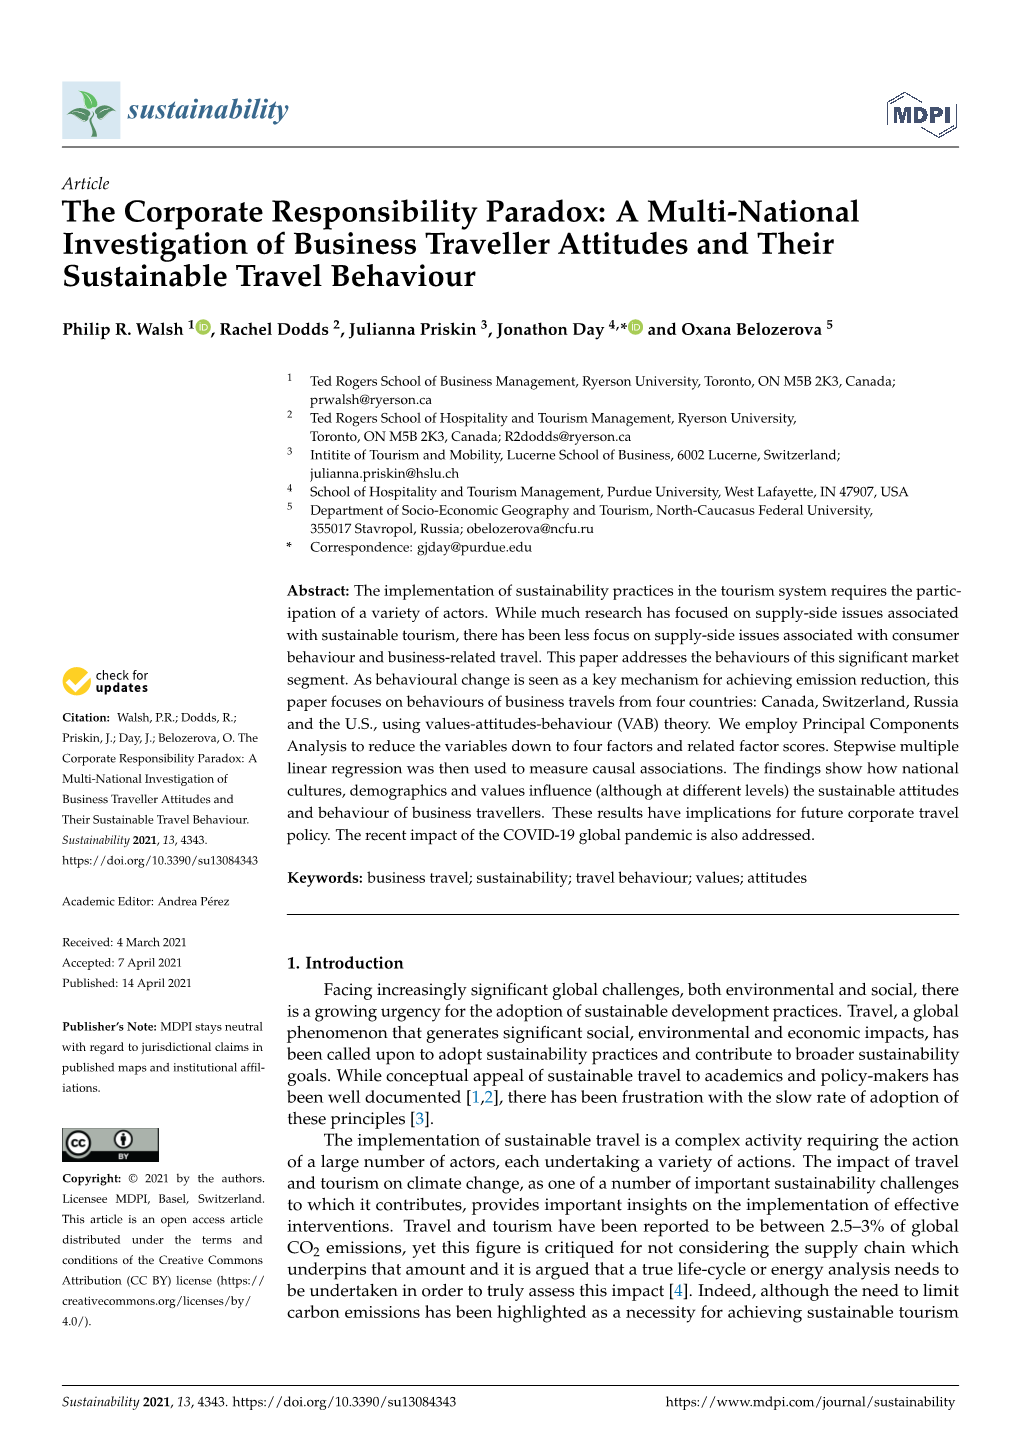 A Multi-National Investigation of Business Traveller Attitudes and Their Sustainable Travel Behaviour